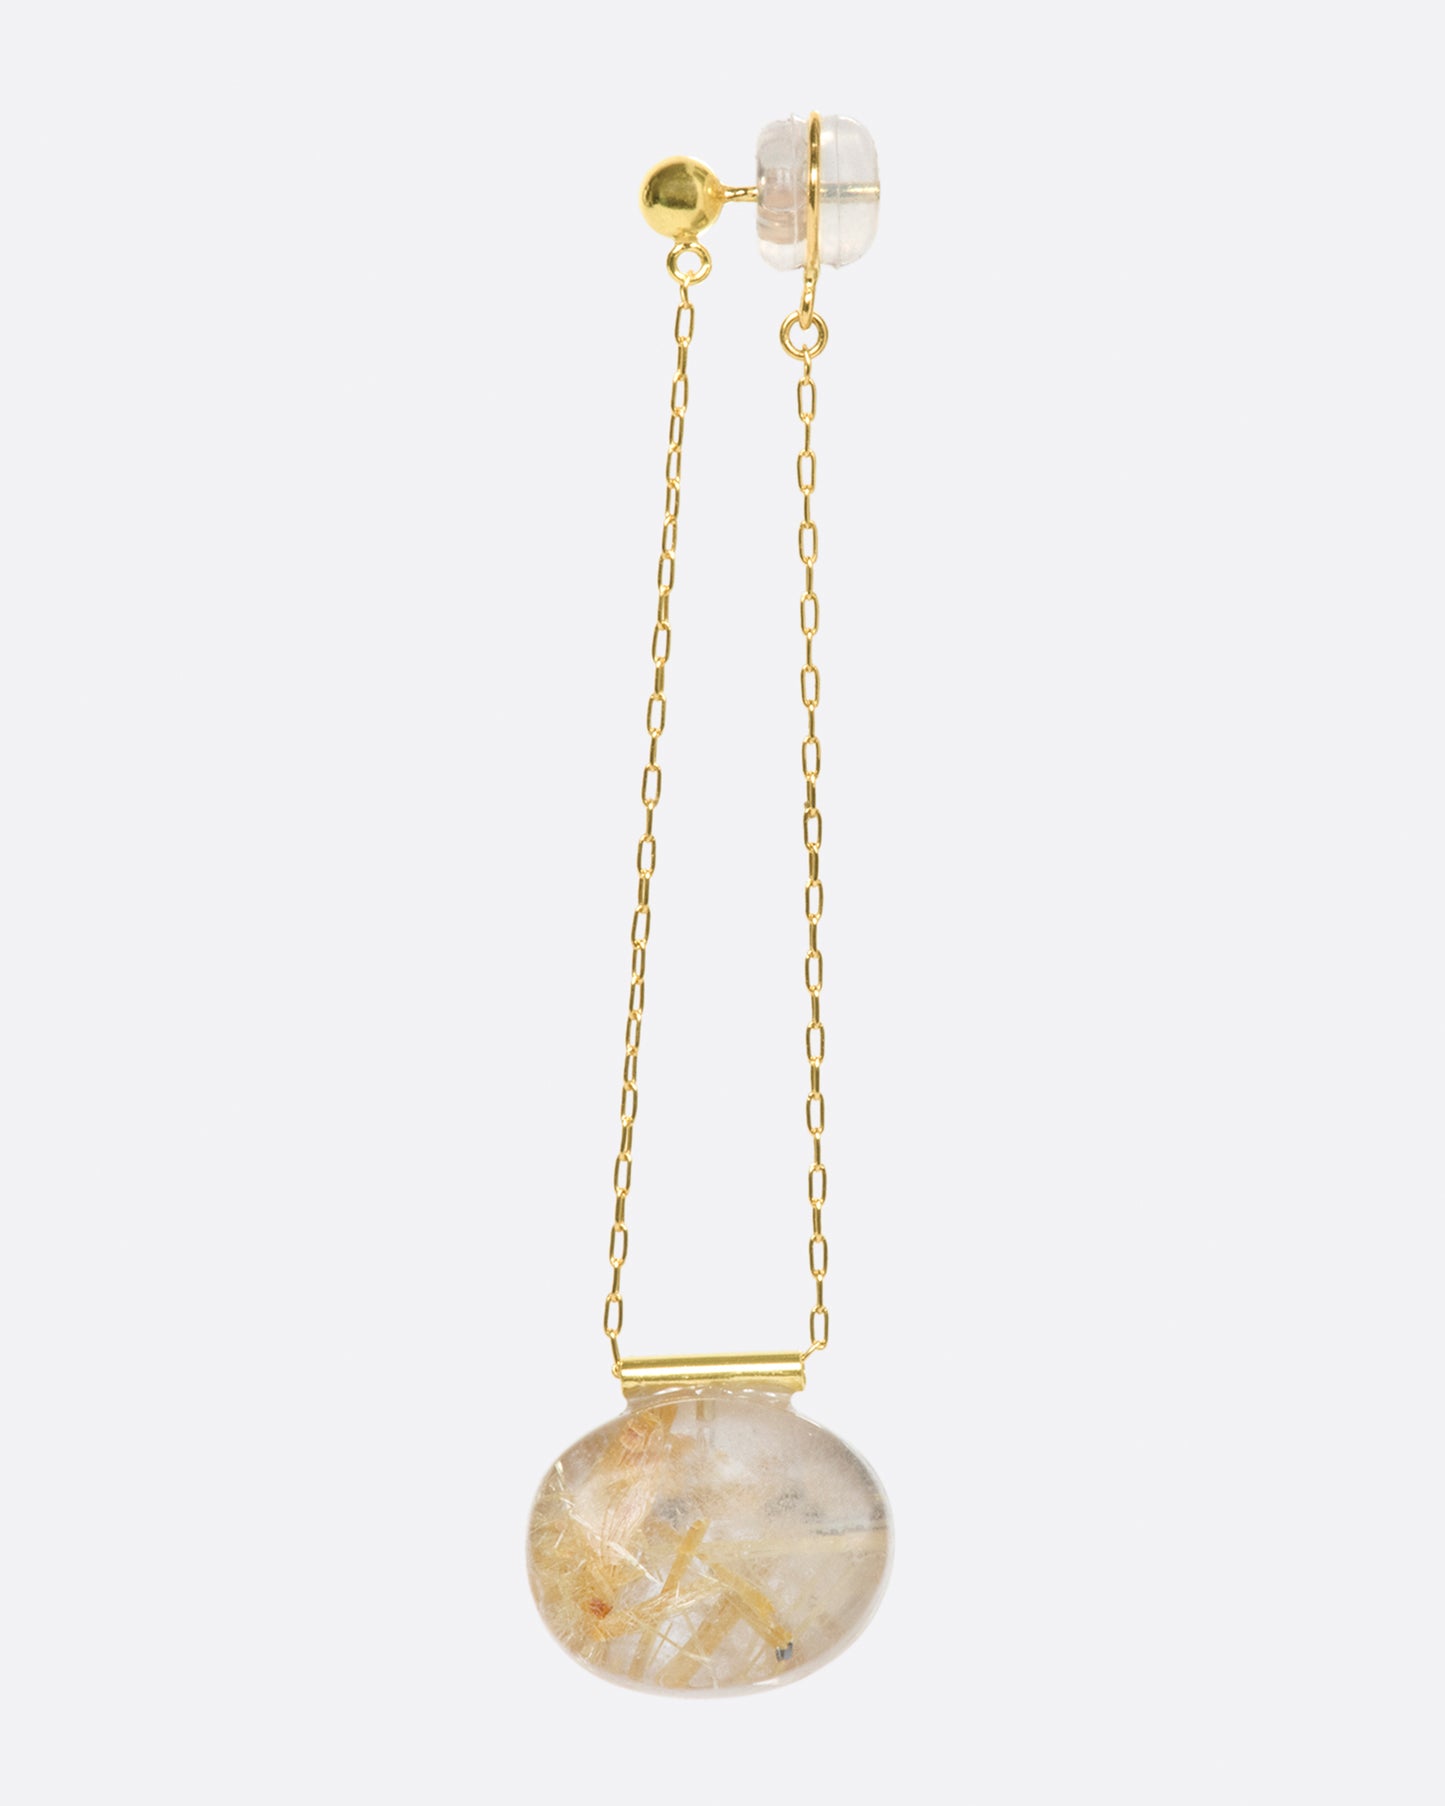 A stud earring with a chain drop, featuring an oval gold rutilated quartz.